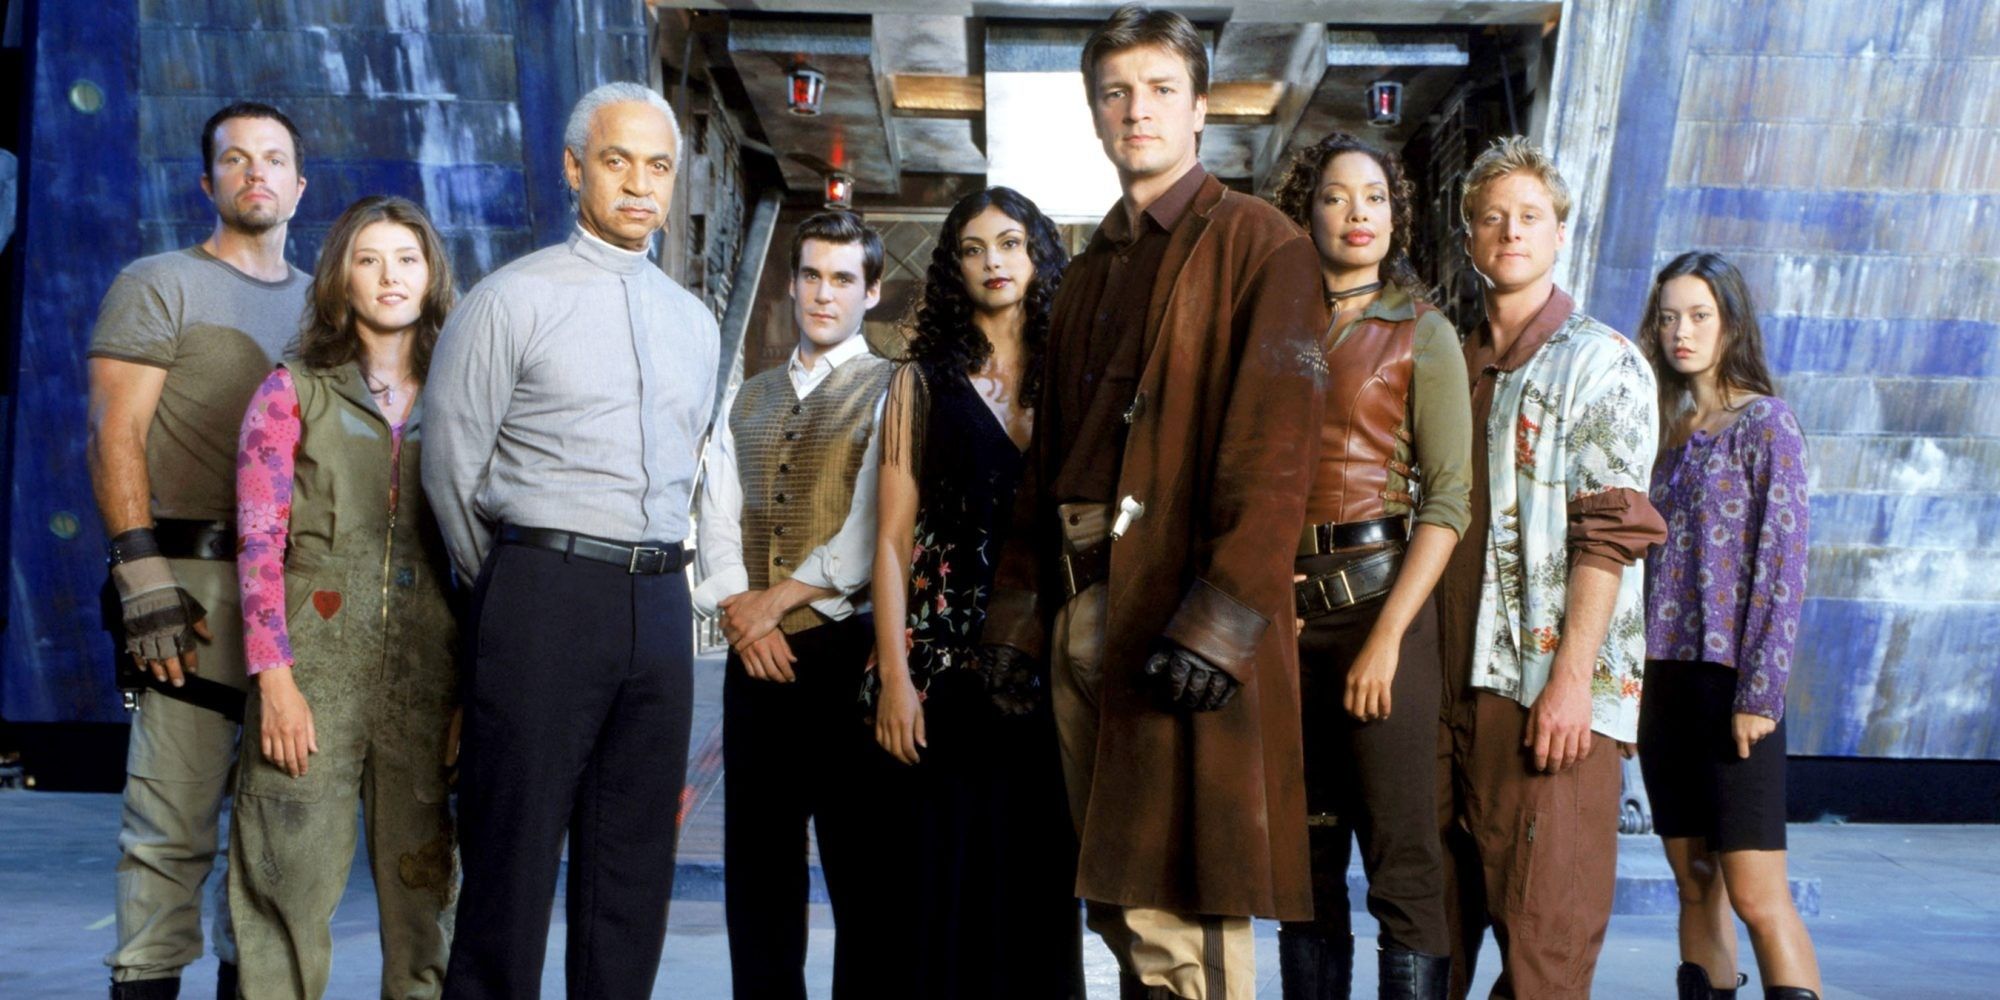 The Cast of Firefly